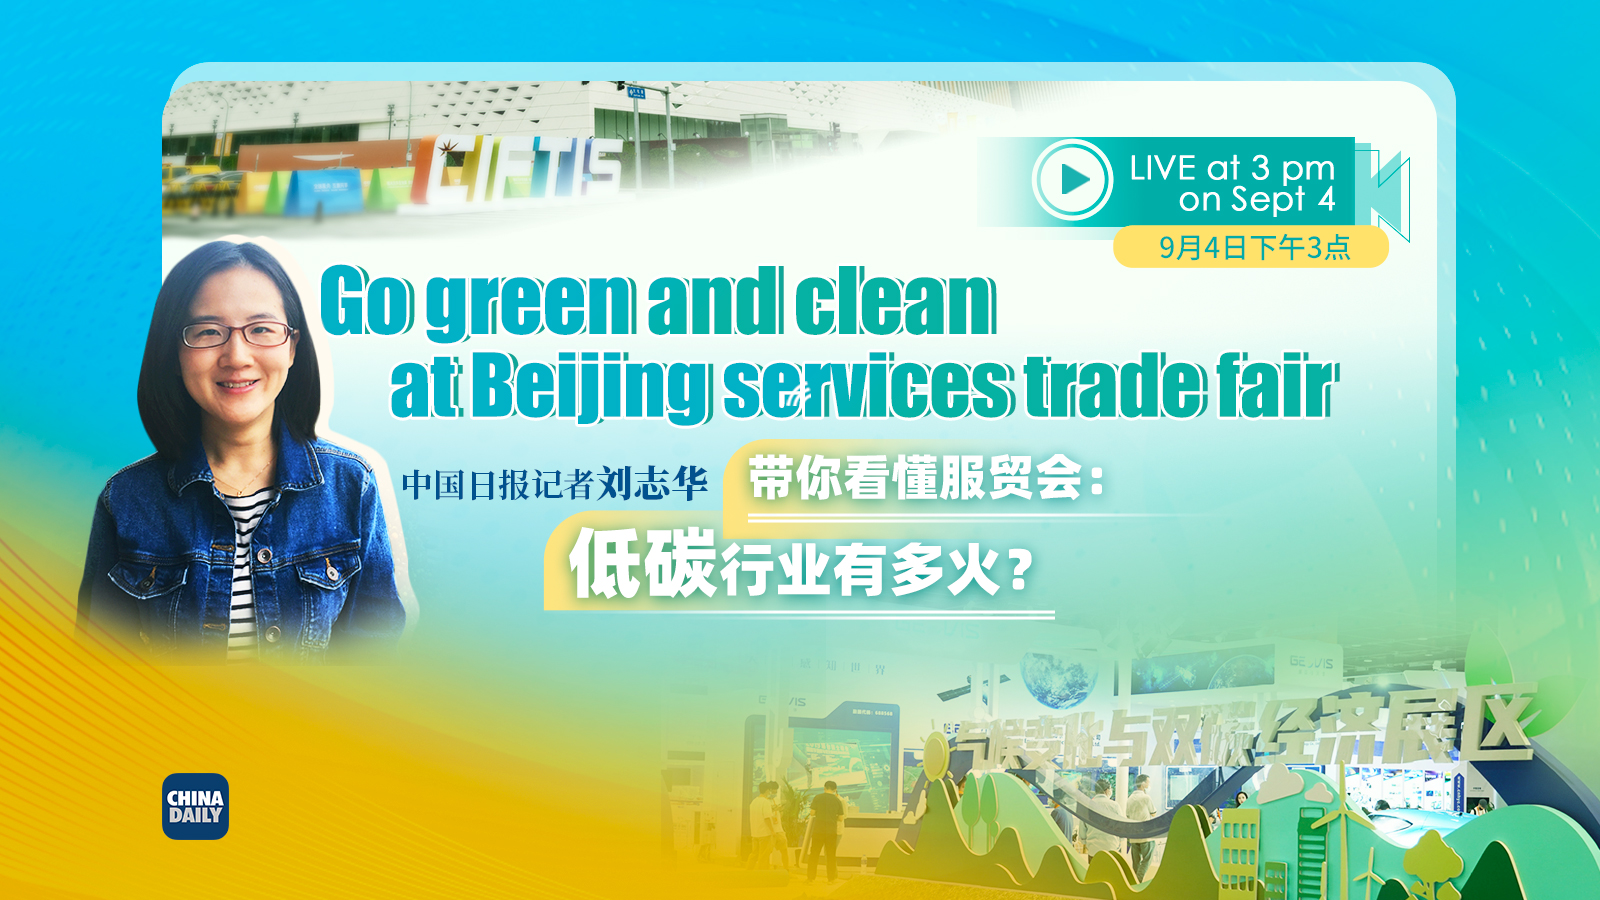 Watch it again: Go green and clean at Beijing services trade fair